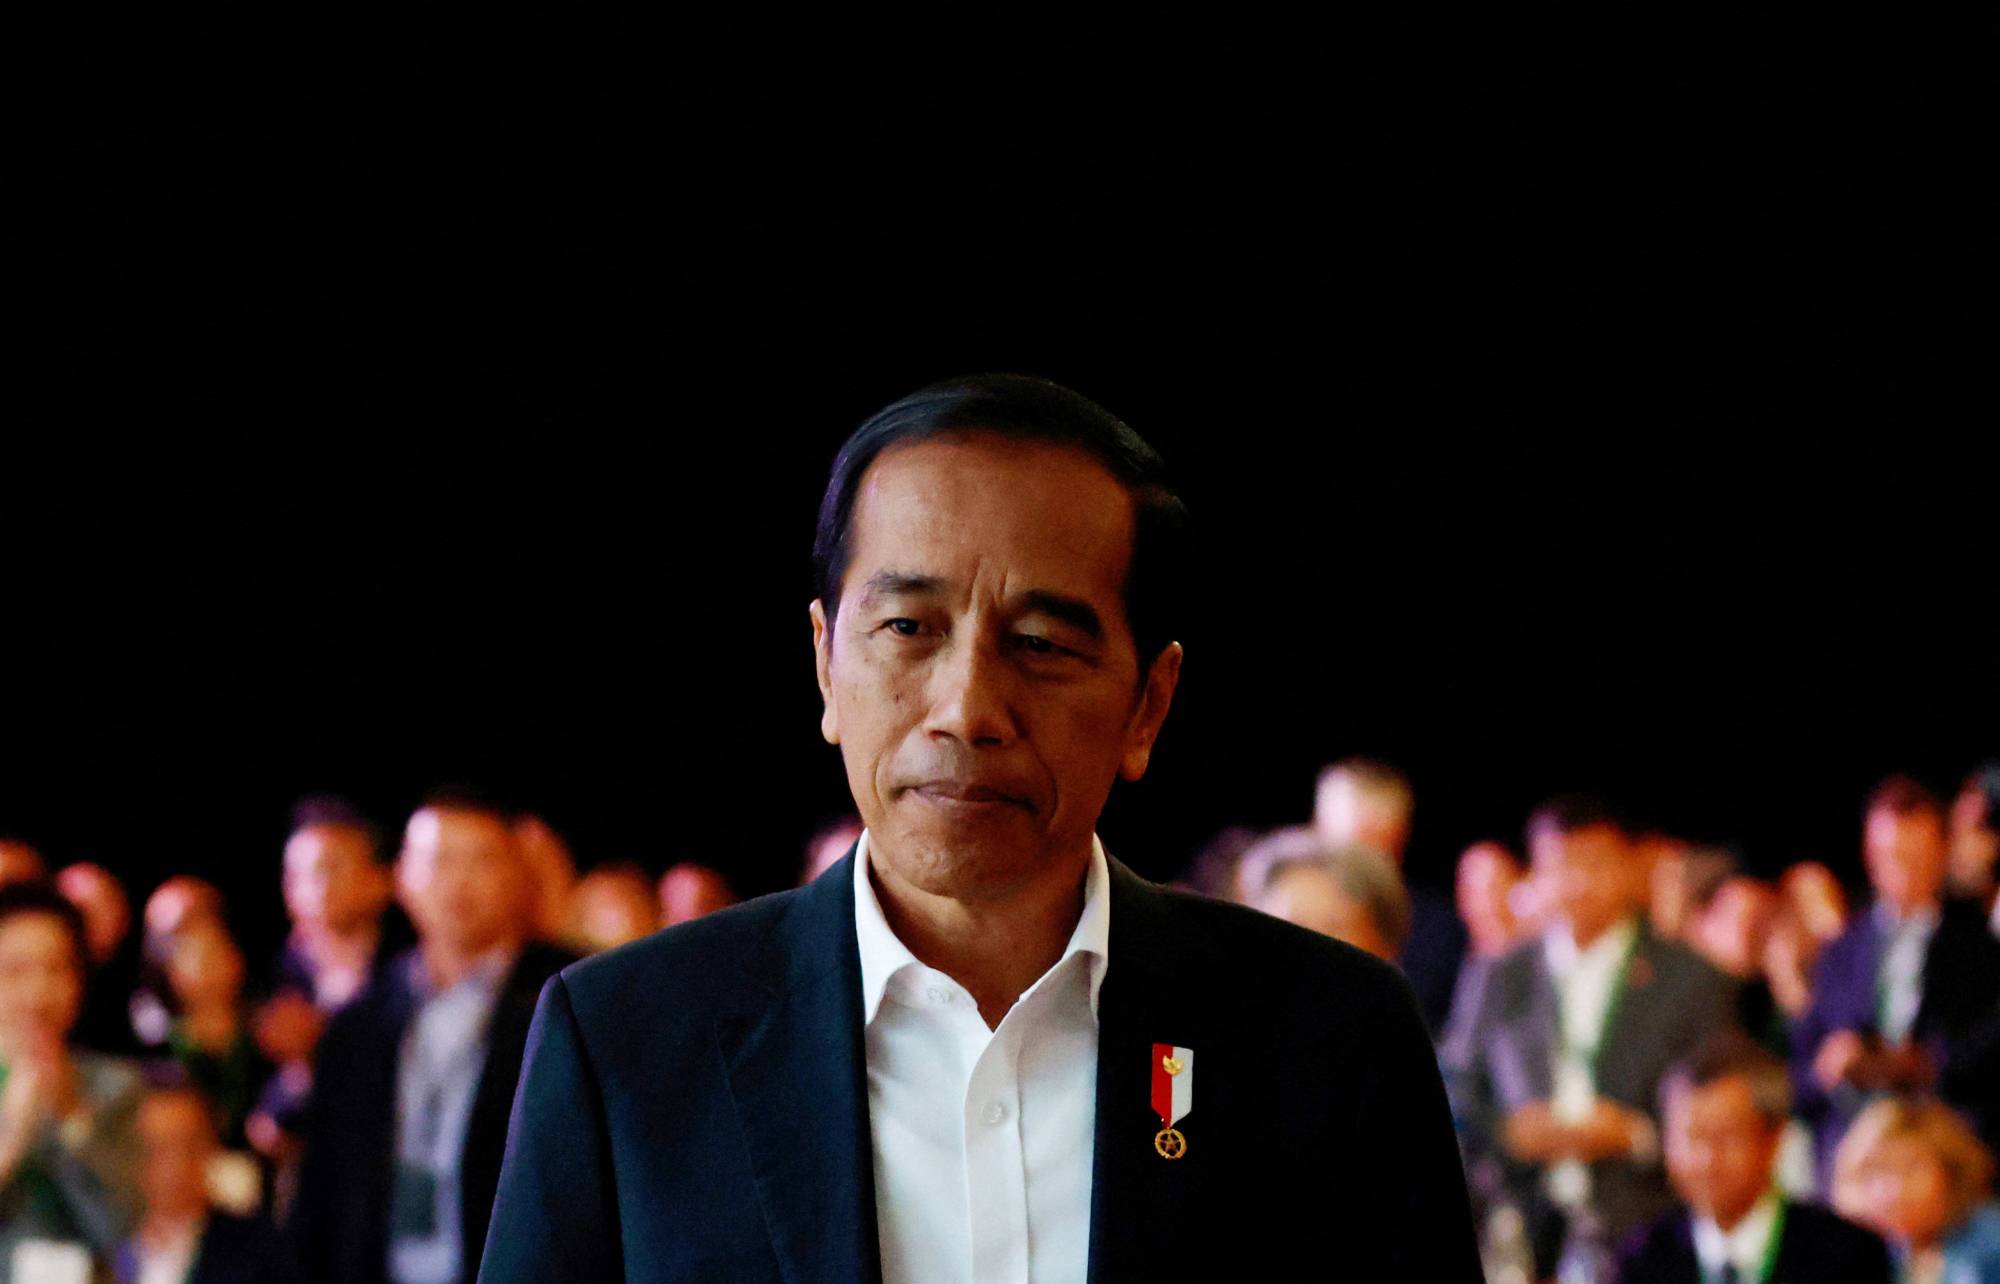 Indonesia's President Joko Widodo's approval rating hit an all-time high of 79.1% in May, showing that his political skills remain unrivaled in Indonesia. | REUTERS